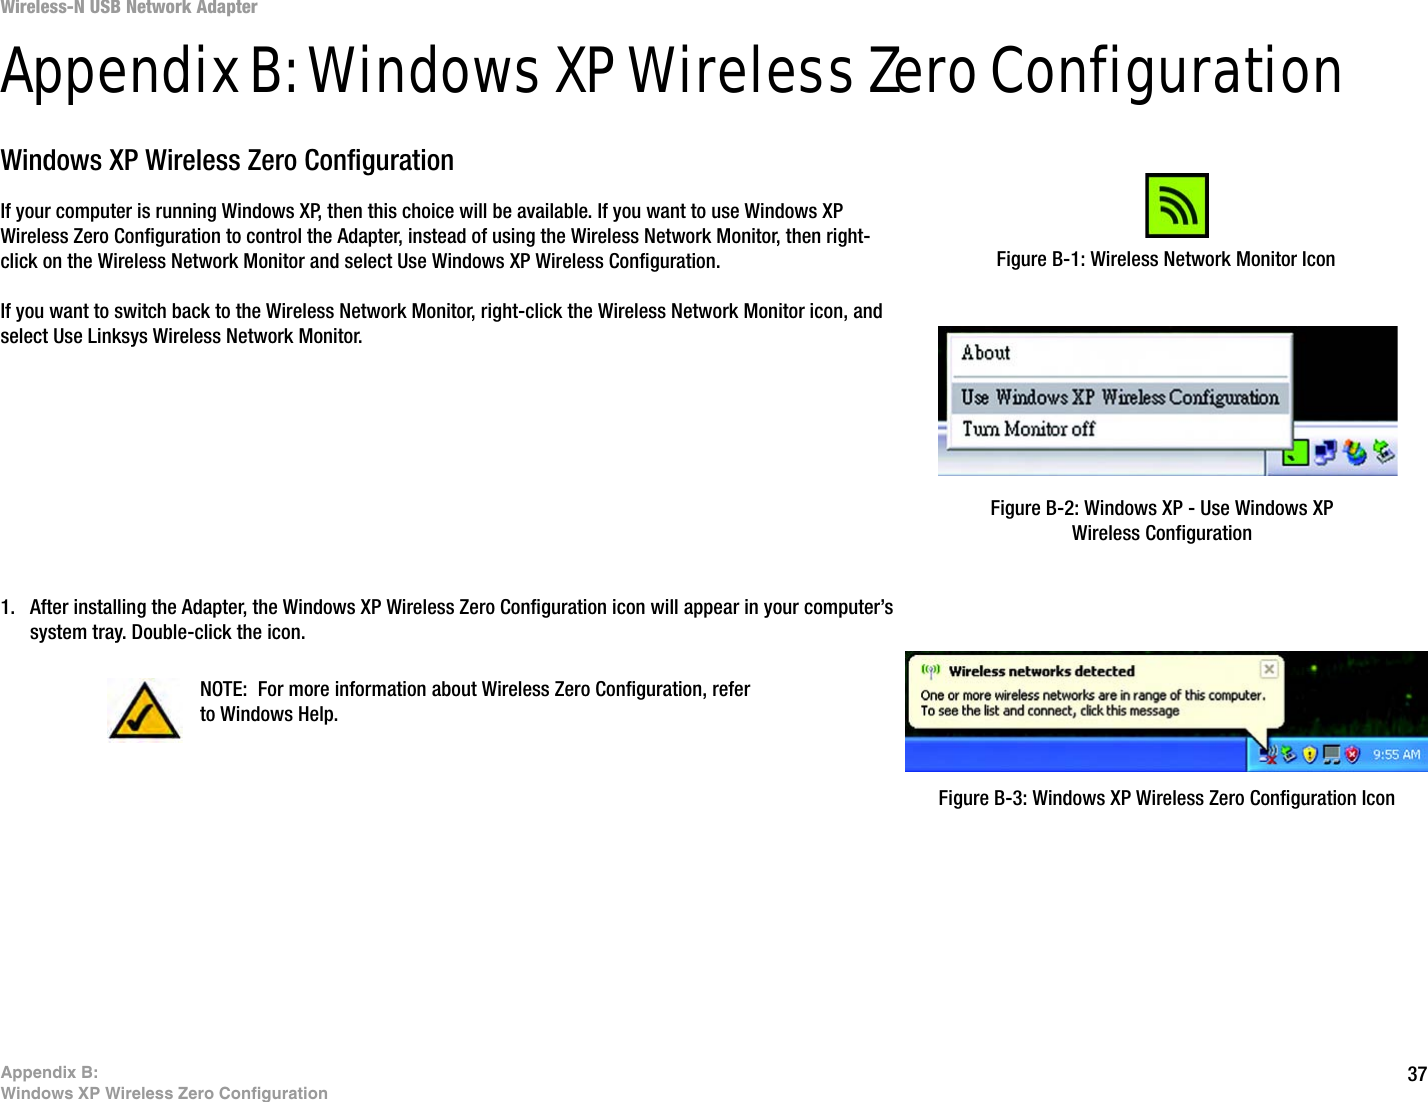 37Appendix B: Windows XP Wireless Zero ConfigurationWireless-N USB Network AdapterAppendix B: Windows XP Wireless Zero ConfigurationWindows XP Wireless Zero ConfigurationIf your computer is running Windows XP, then this choice will be available. If you want to use Windows XP Wireless Zero Configuration to control the Adapter, instead of using the Wireless Network Monitor, then right-click on the Wireless Network Monitor and select Use Windows XP Wireless Configuration. If you want to switch back to the Wireless Network Monitor, right-click the Wireless Network Monitor icon, and select Use Linksys Wireless Network Monitor.1. After installing the Adapter, the Windows XP Wireless Zero Configuration icon will appear in your computer’s system tray. Double-click the icon. Figure B-1: Wireless Network Monitor IconFigure B-2: Windows XP - Use Windows XP Wireless ConfigurationNOTE: For more information about Wireless Zero Configuration, refer to Windows Help.Figure B-3: Windows XP Wireless Zero Configuration Icon